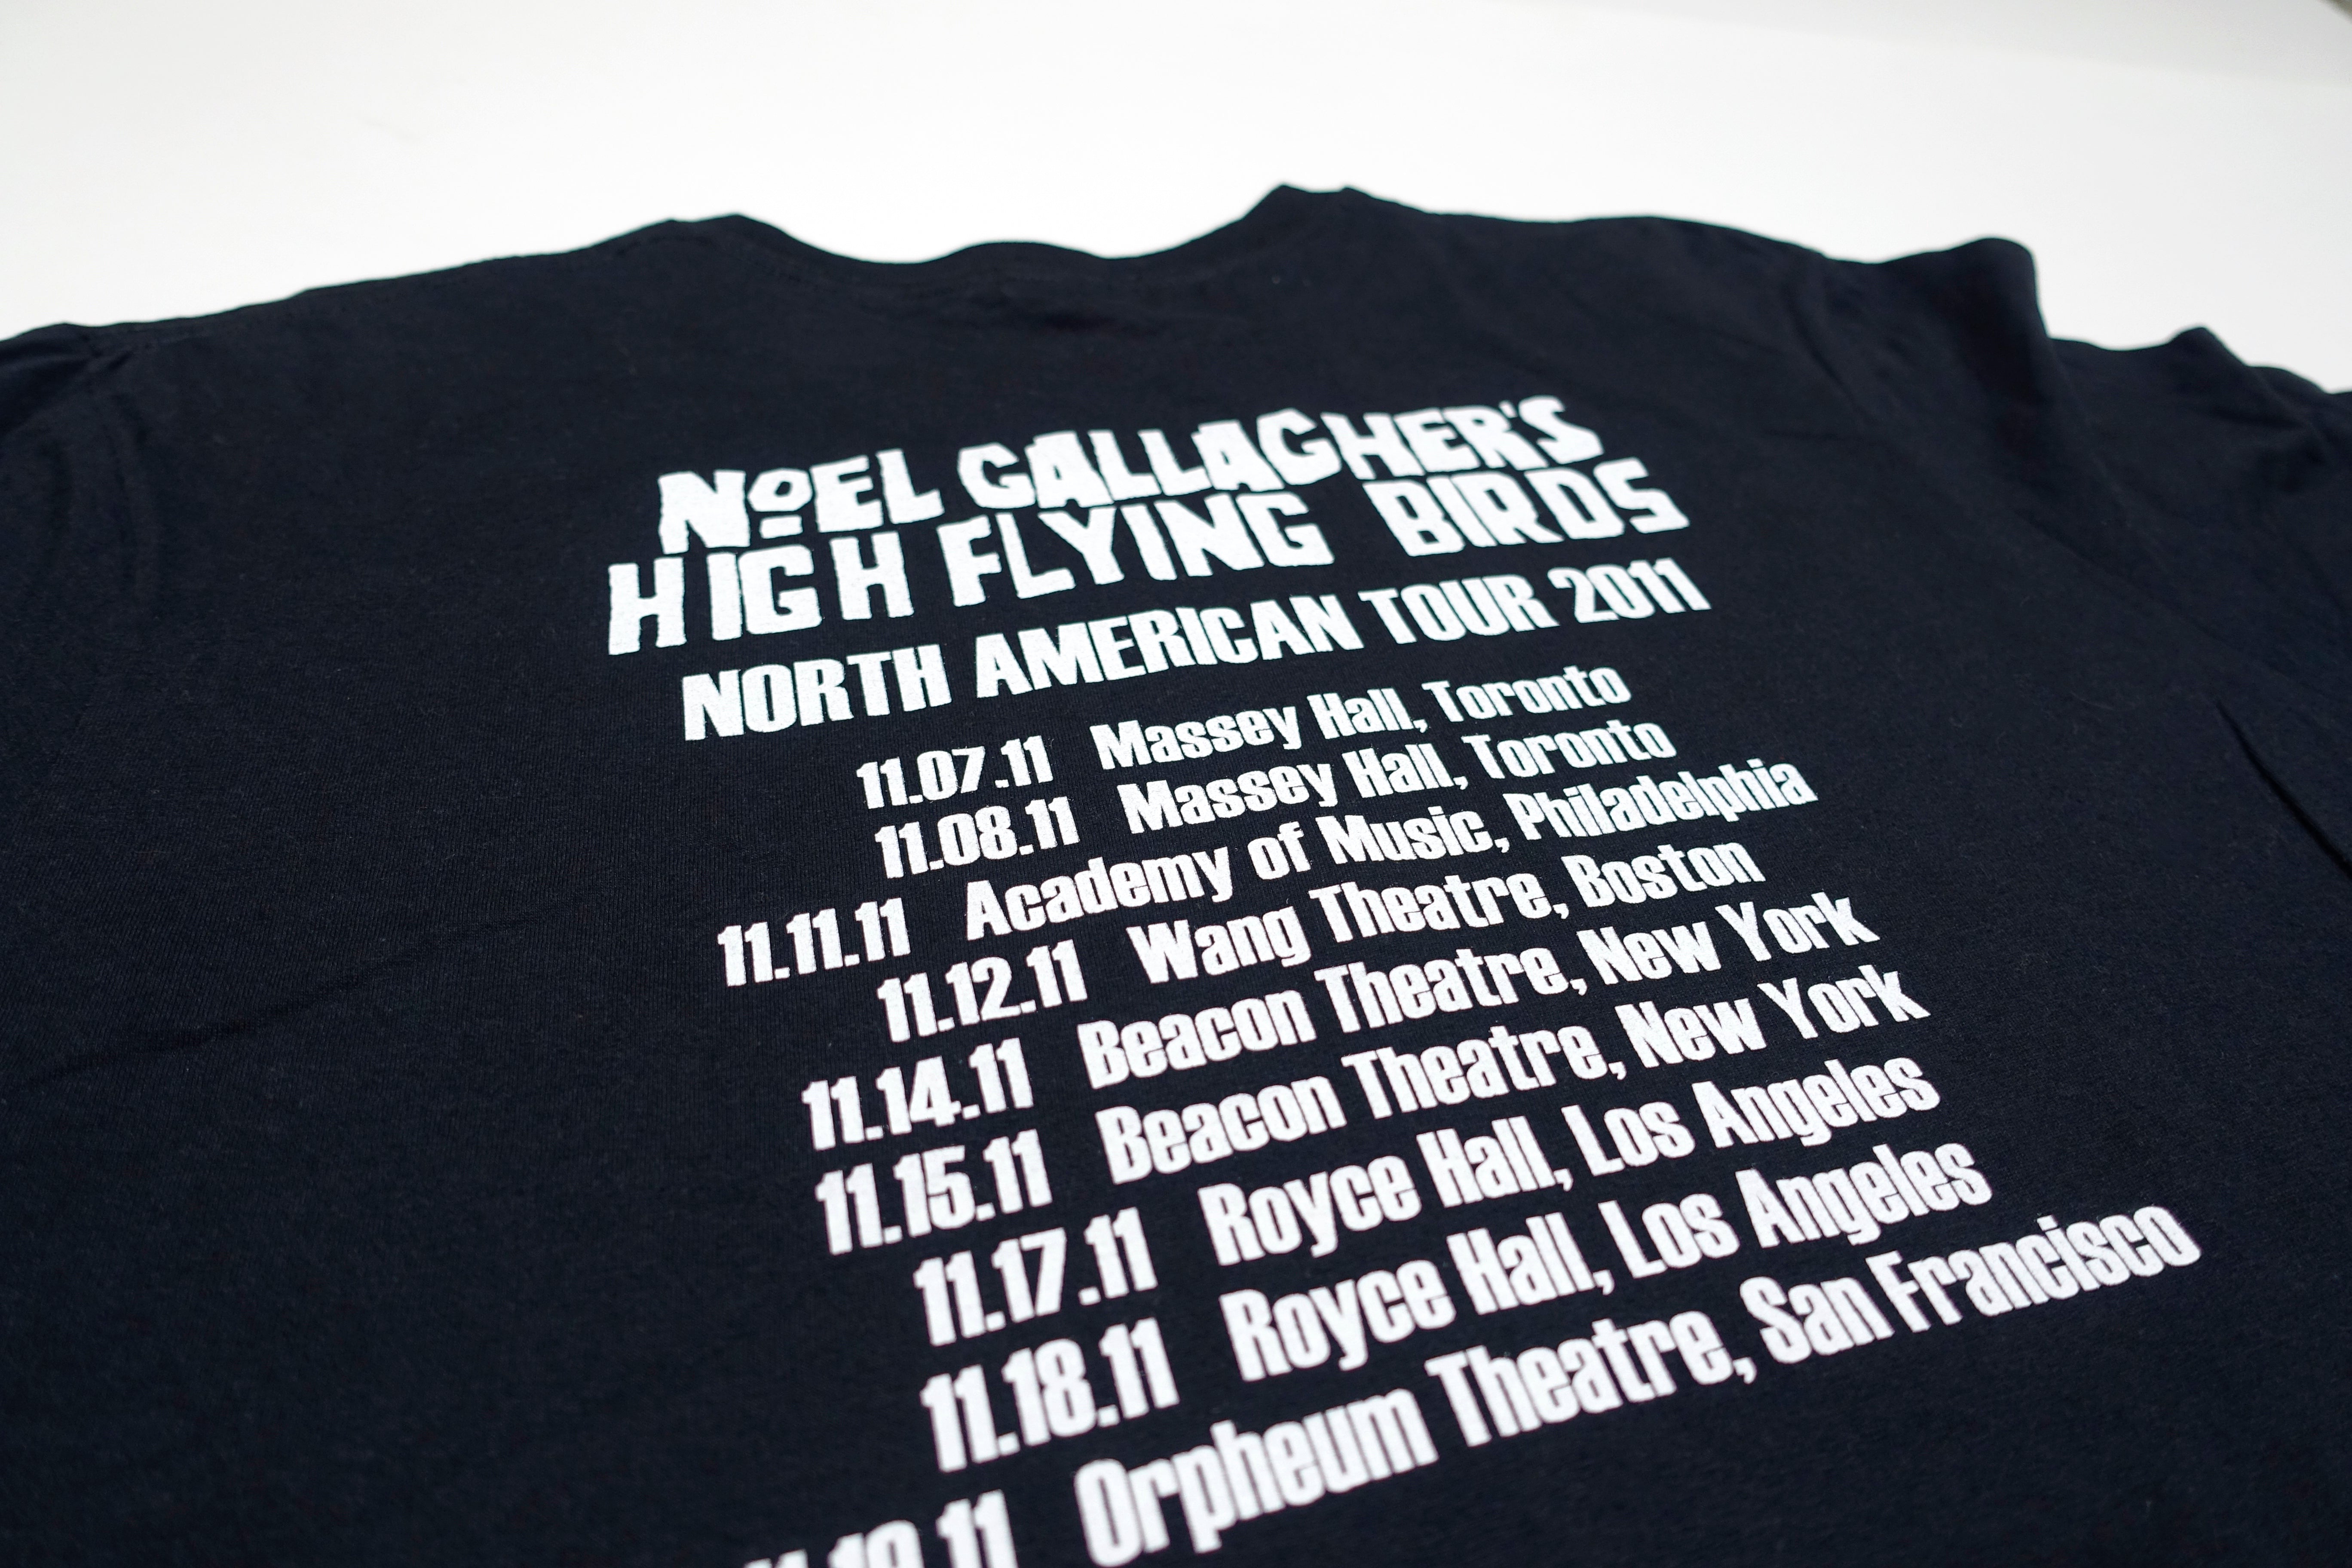 Noel Gallagher's High Flying Birds - 2011 North American Tour Shirt Size Large